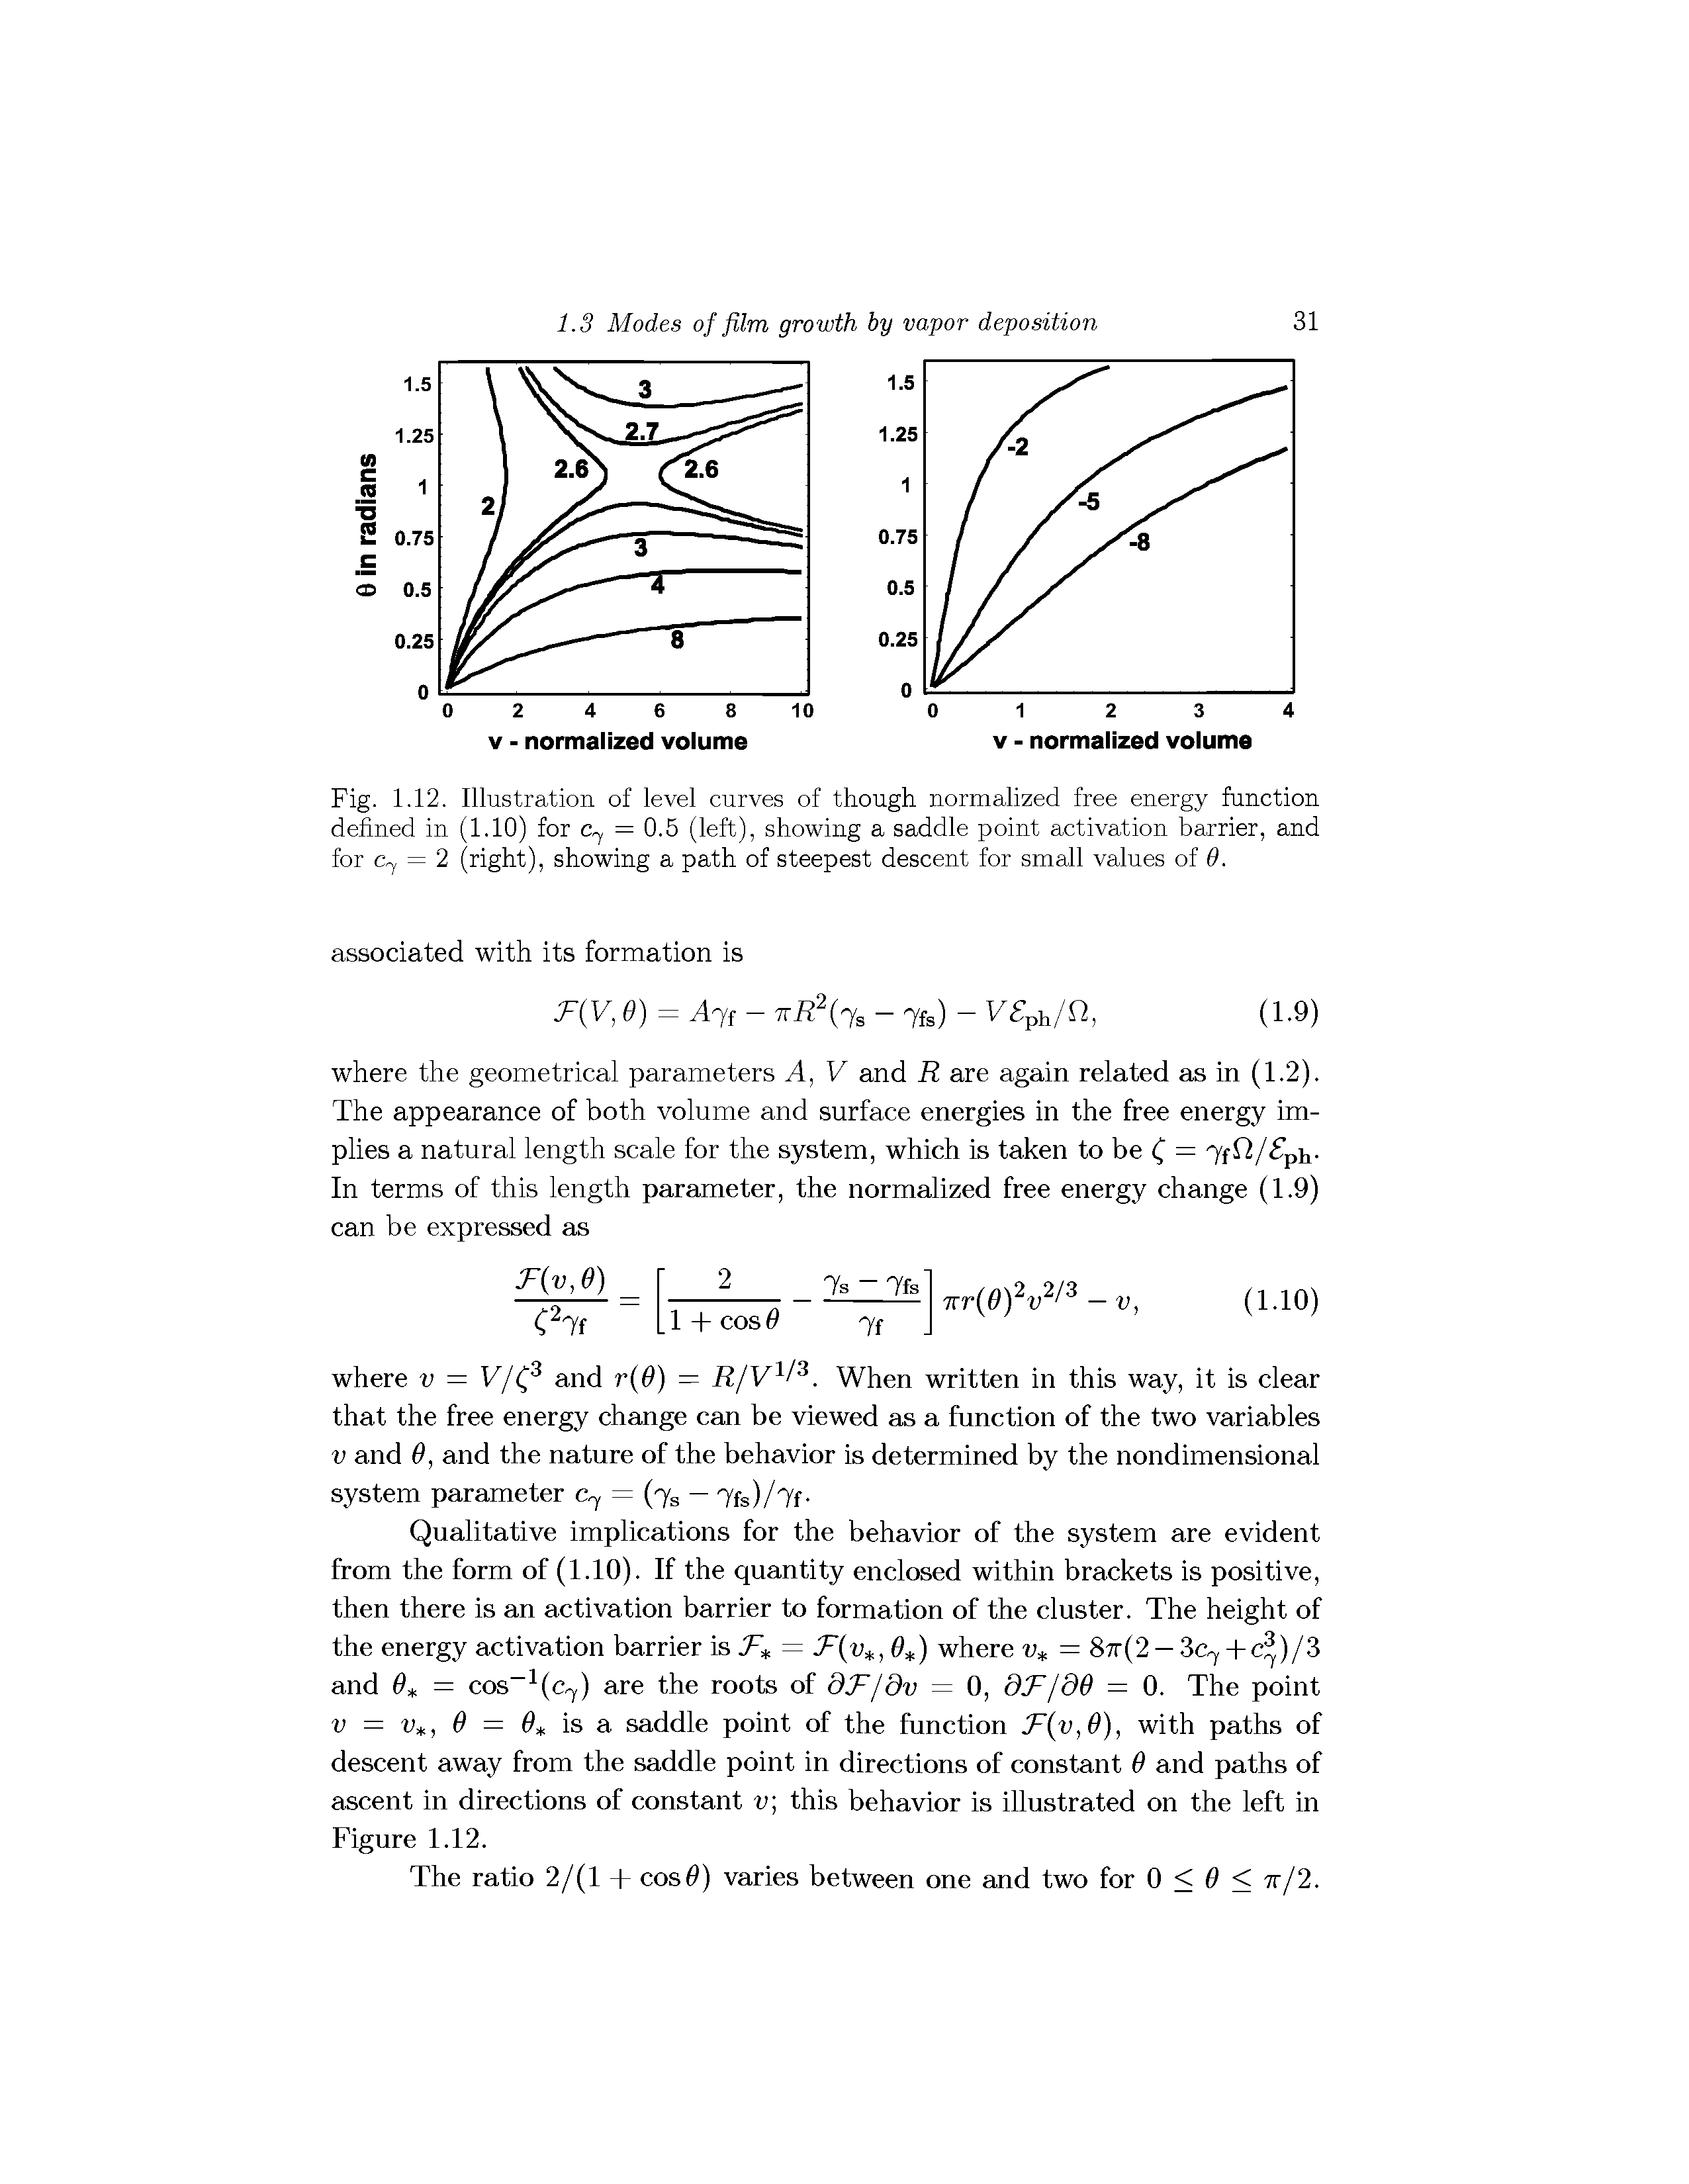 Fig. 1.12. Illustration of level curves of though normalized free energy function defined in (1.10) for c.y = Q.b (left), showing a saddle point activation barrier, and for c. = 2 (right), showing a path of steepest descent for small values of 0.